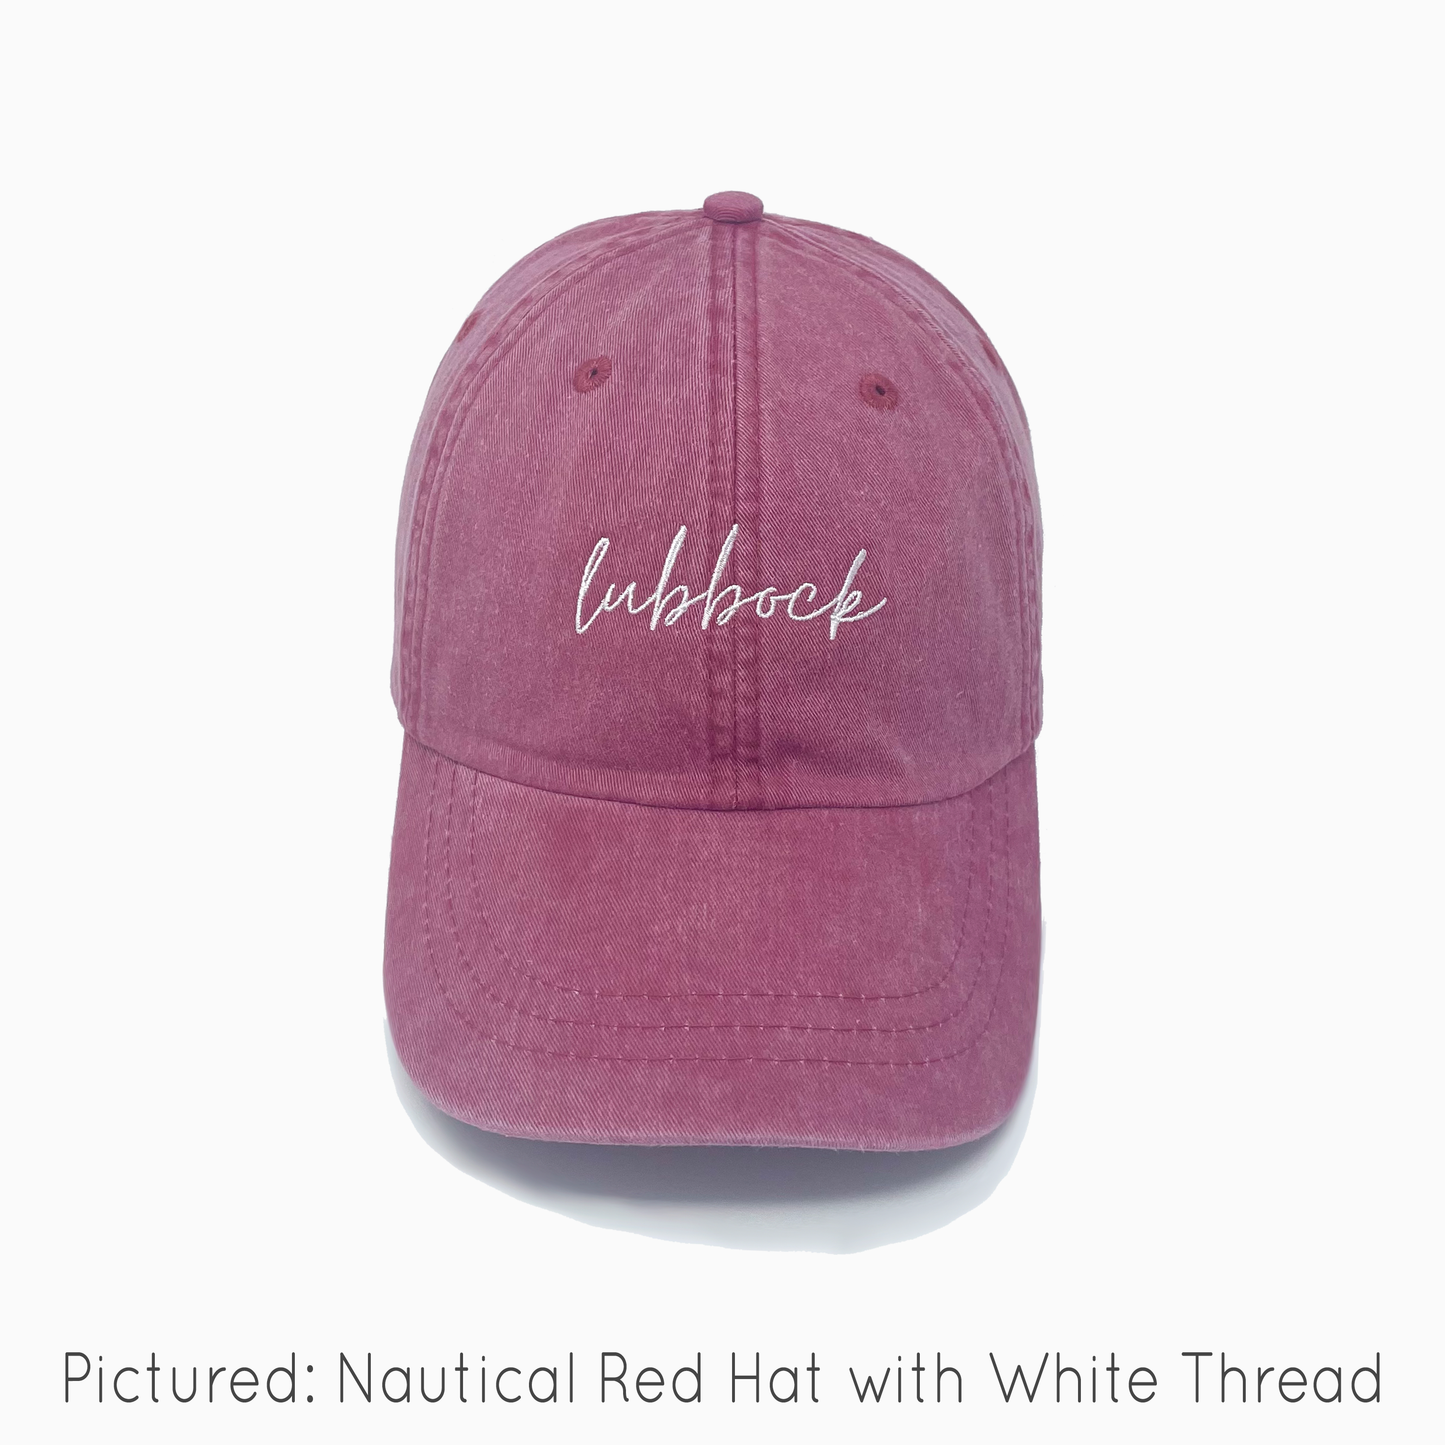 Lubbock (TX) Embroidered Pigment-Dyed Baseball Cap (MoonTime Font) - Adult Unisex